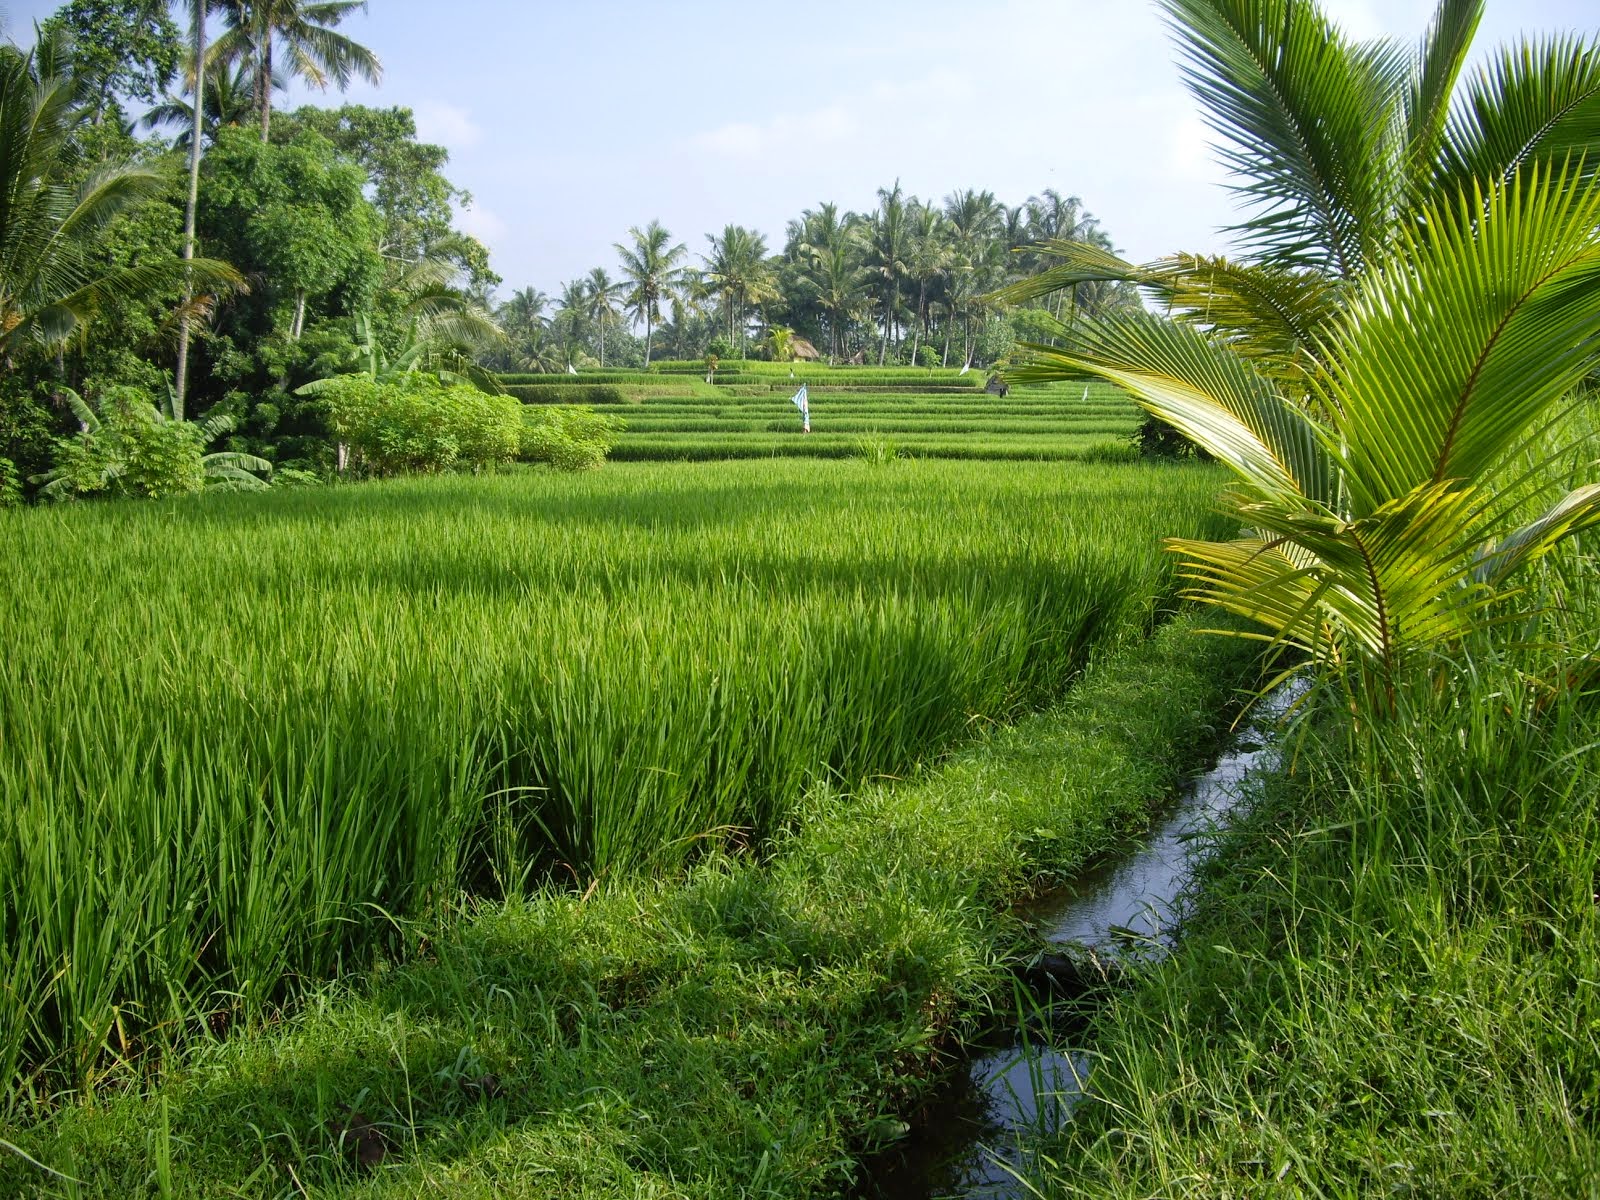 RICE FIELDS OF BALI--LEGENDARY BEAUTY AND PEACE. THE ANCIENT PATRIMONY OF THE LANDED BALINESE